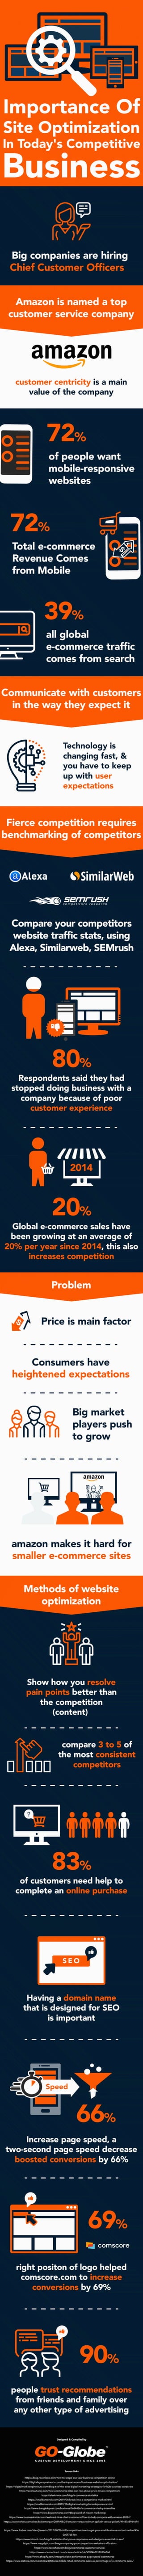 Importance of site optimization in today’s competitive business [infographic]